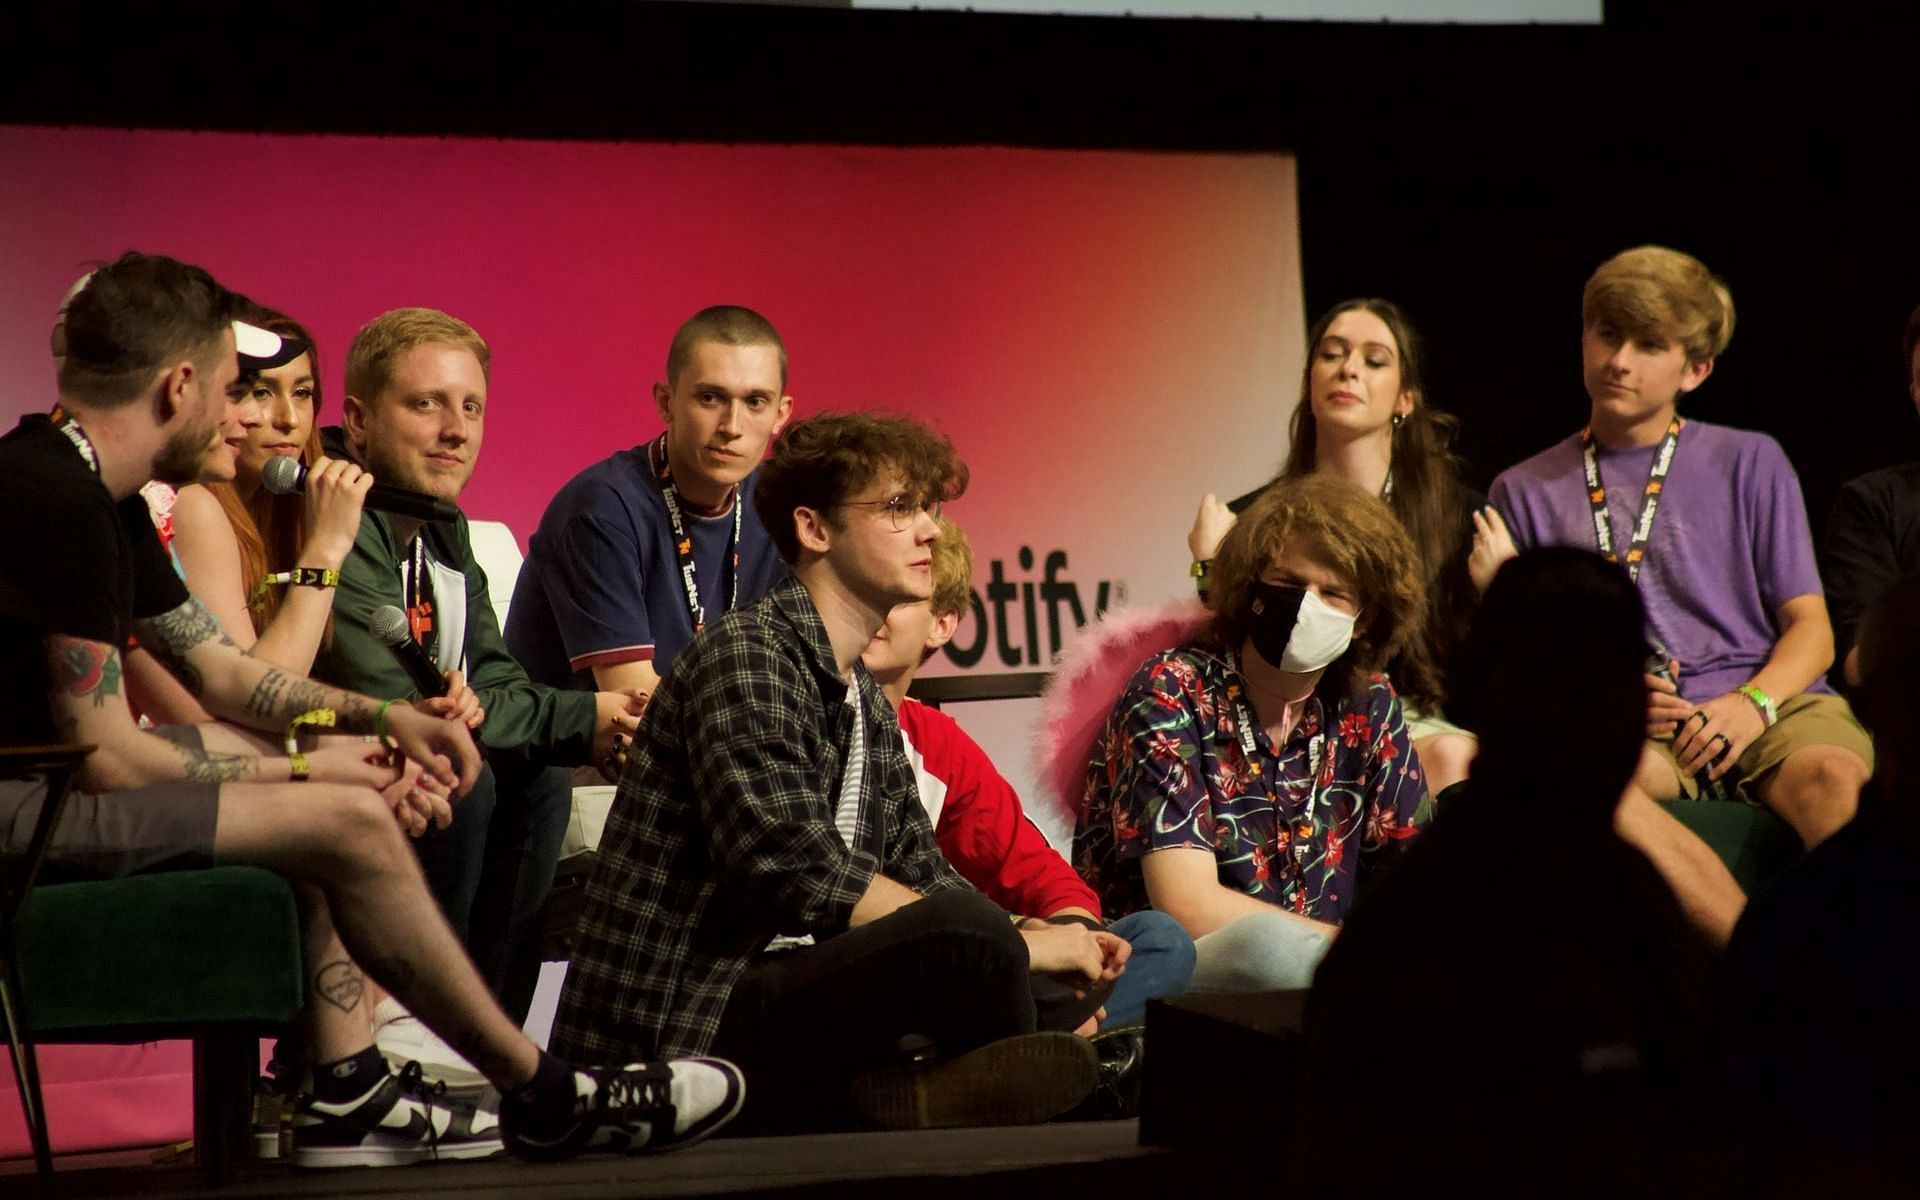 Wilbur Soot, TommyInnit, Ph1LzA, Ranboo. and other Minecraft streamers in VidCon (Image via @livxmars Twitter)